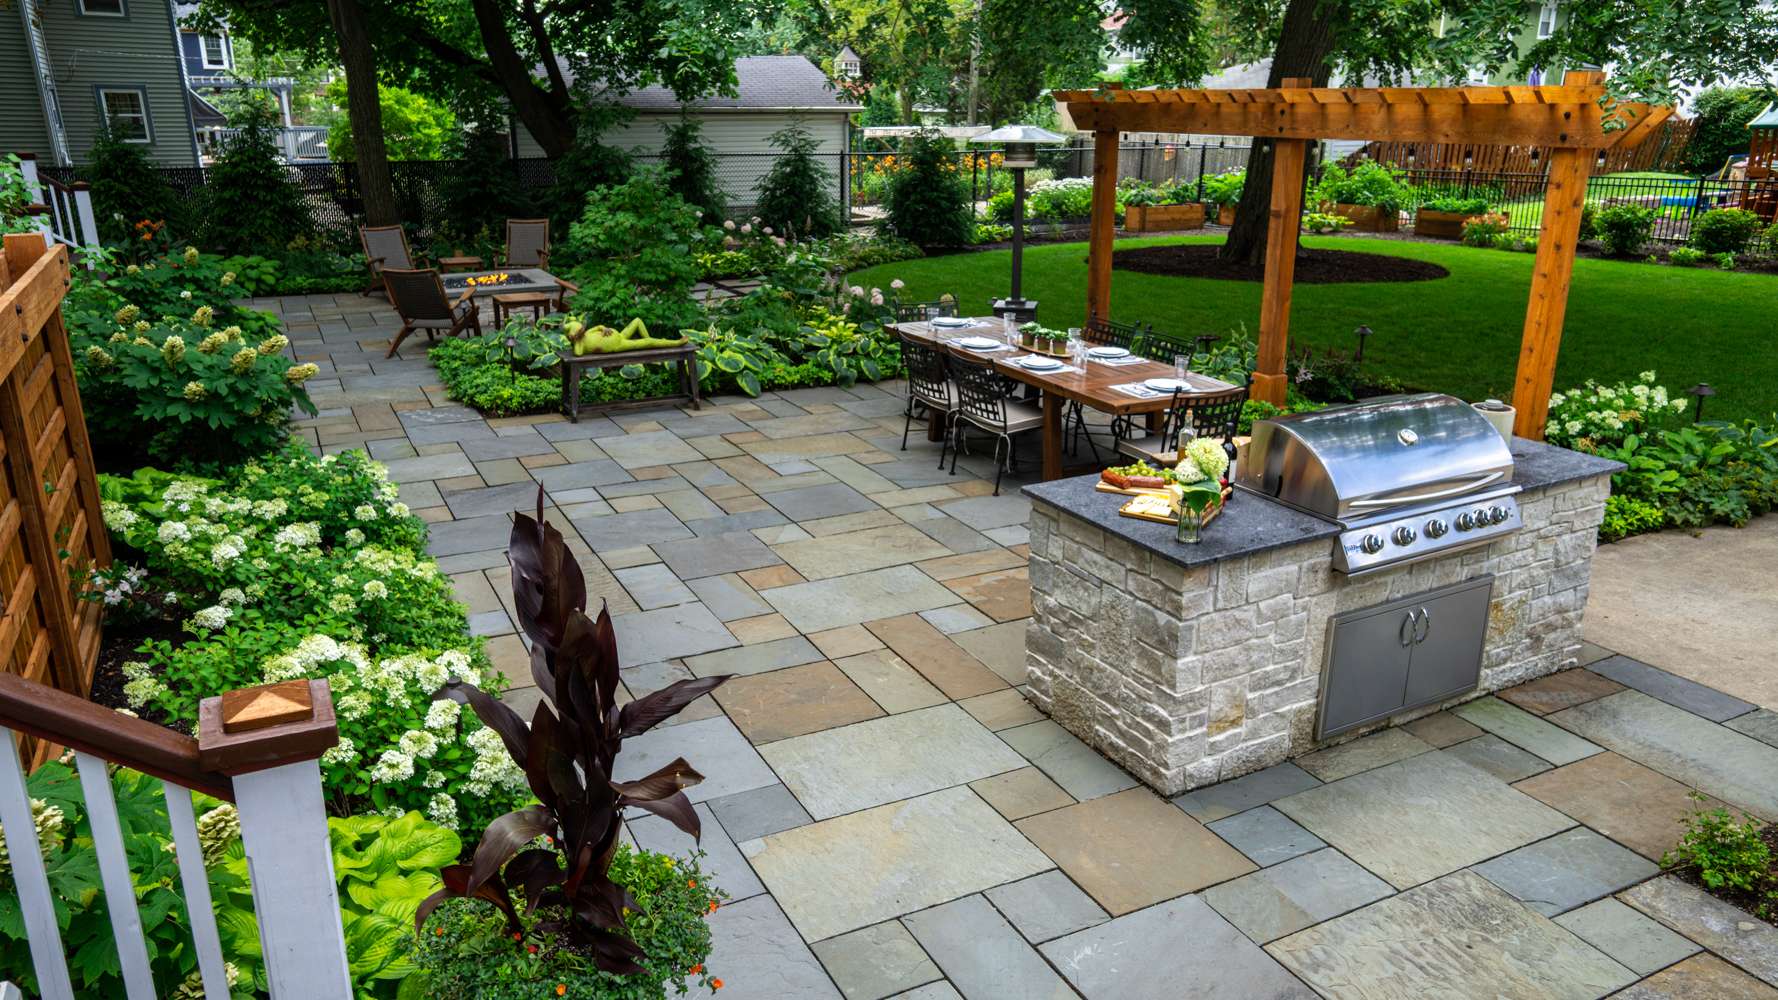 bluestone patio with outdoor kitchen and seating area